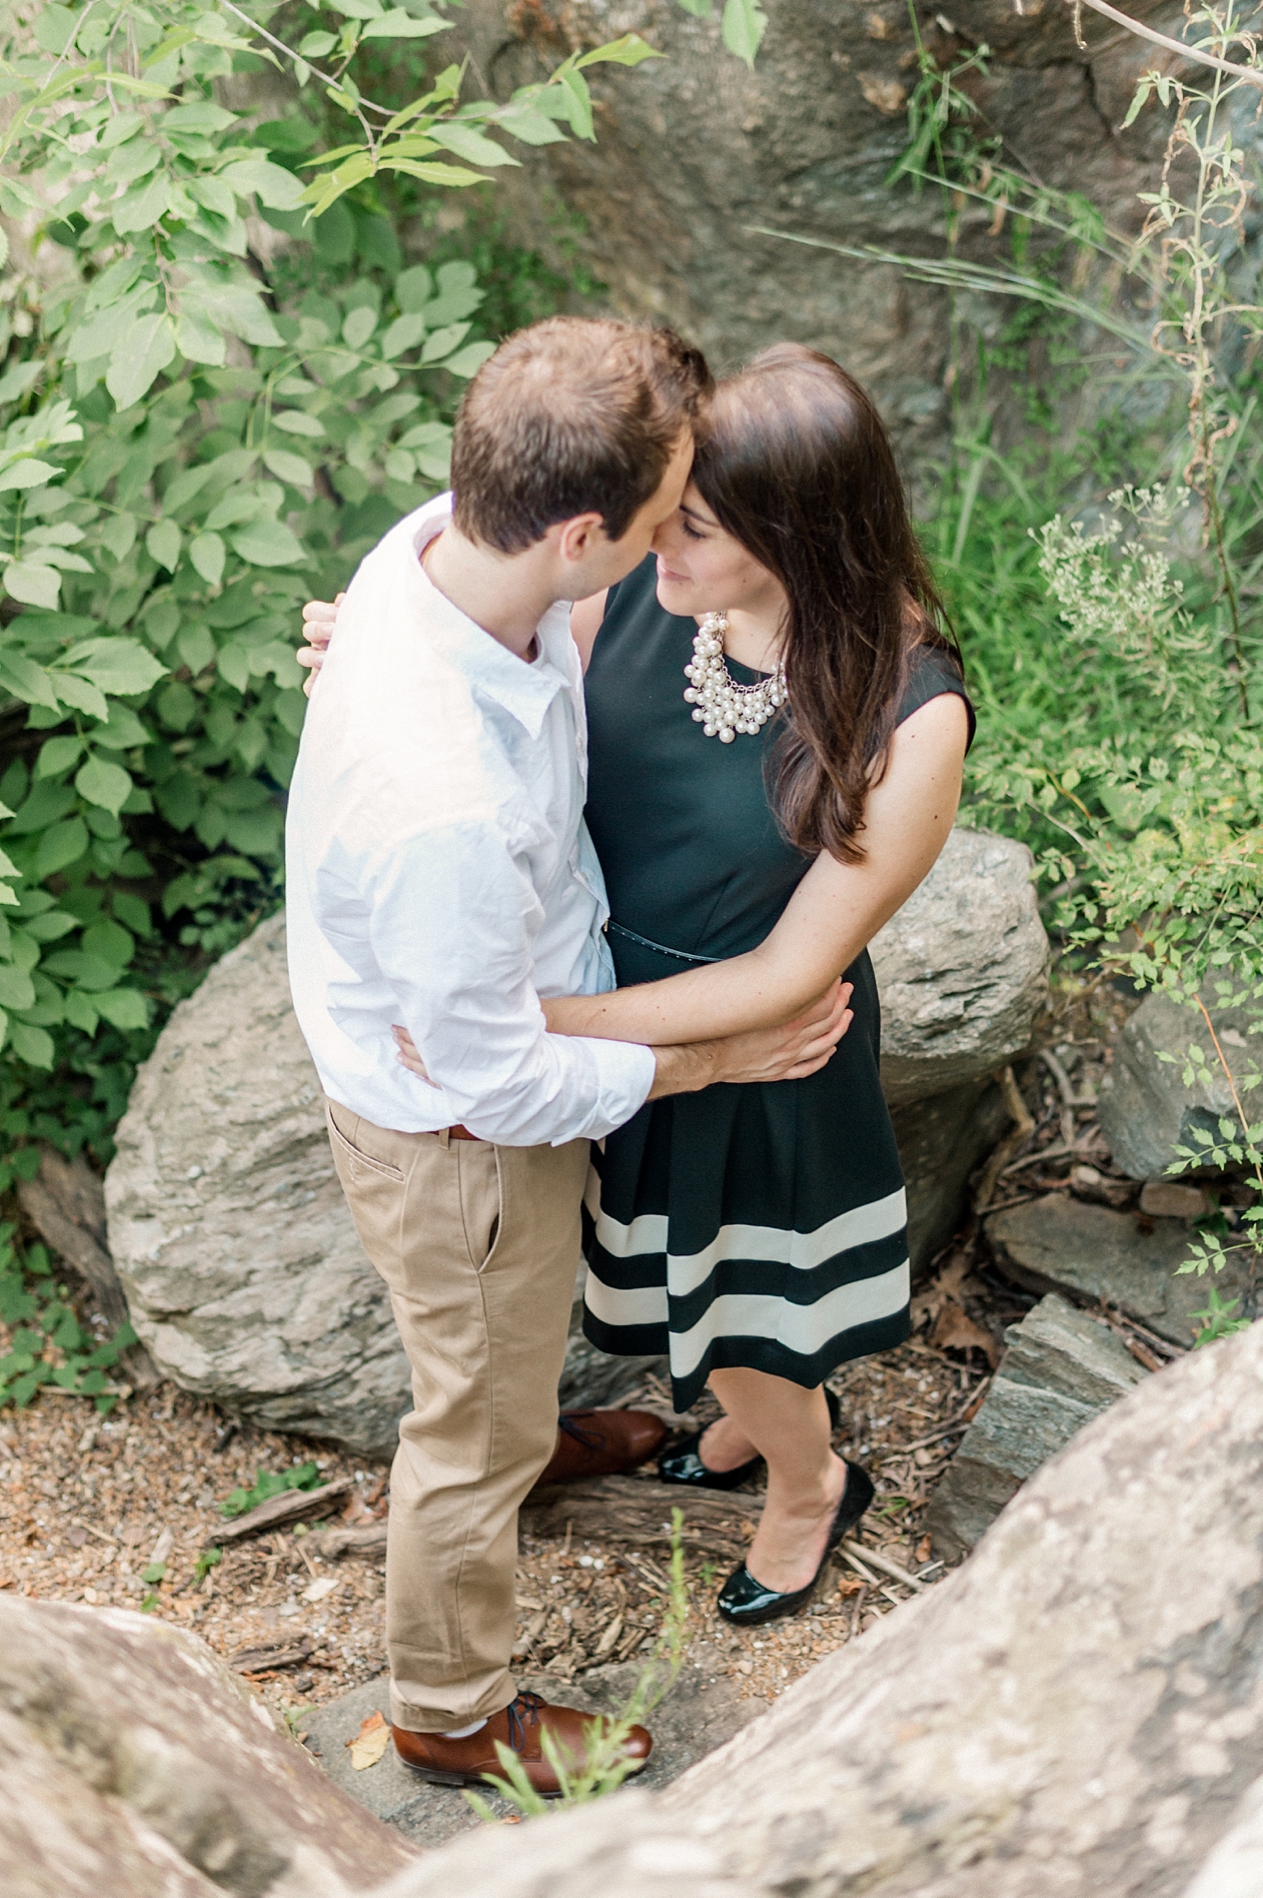 A Classic and Romantic Great Falls, Maryland Engagement session by Washington DC Fine Art Photographer Lauren R Swann